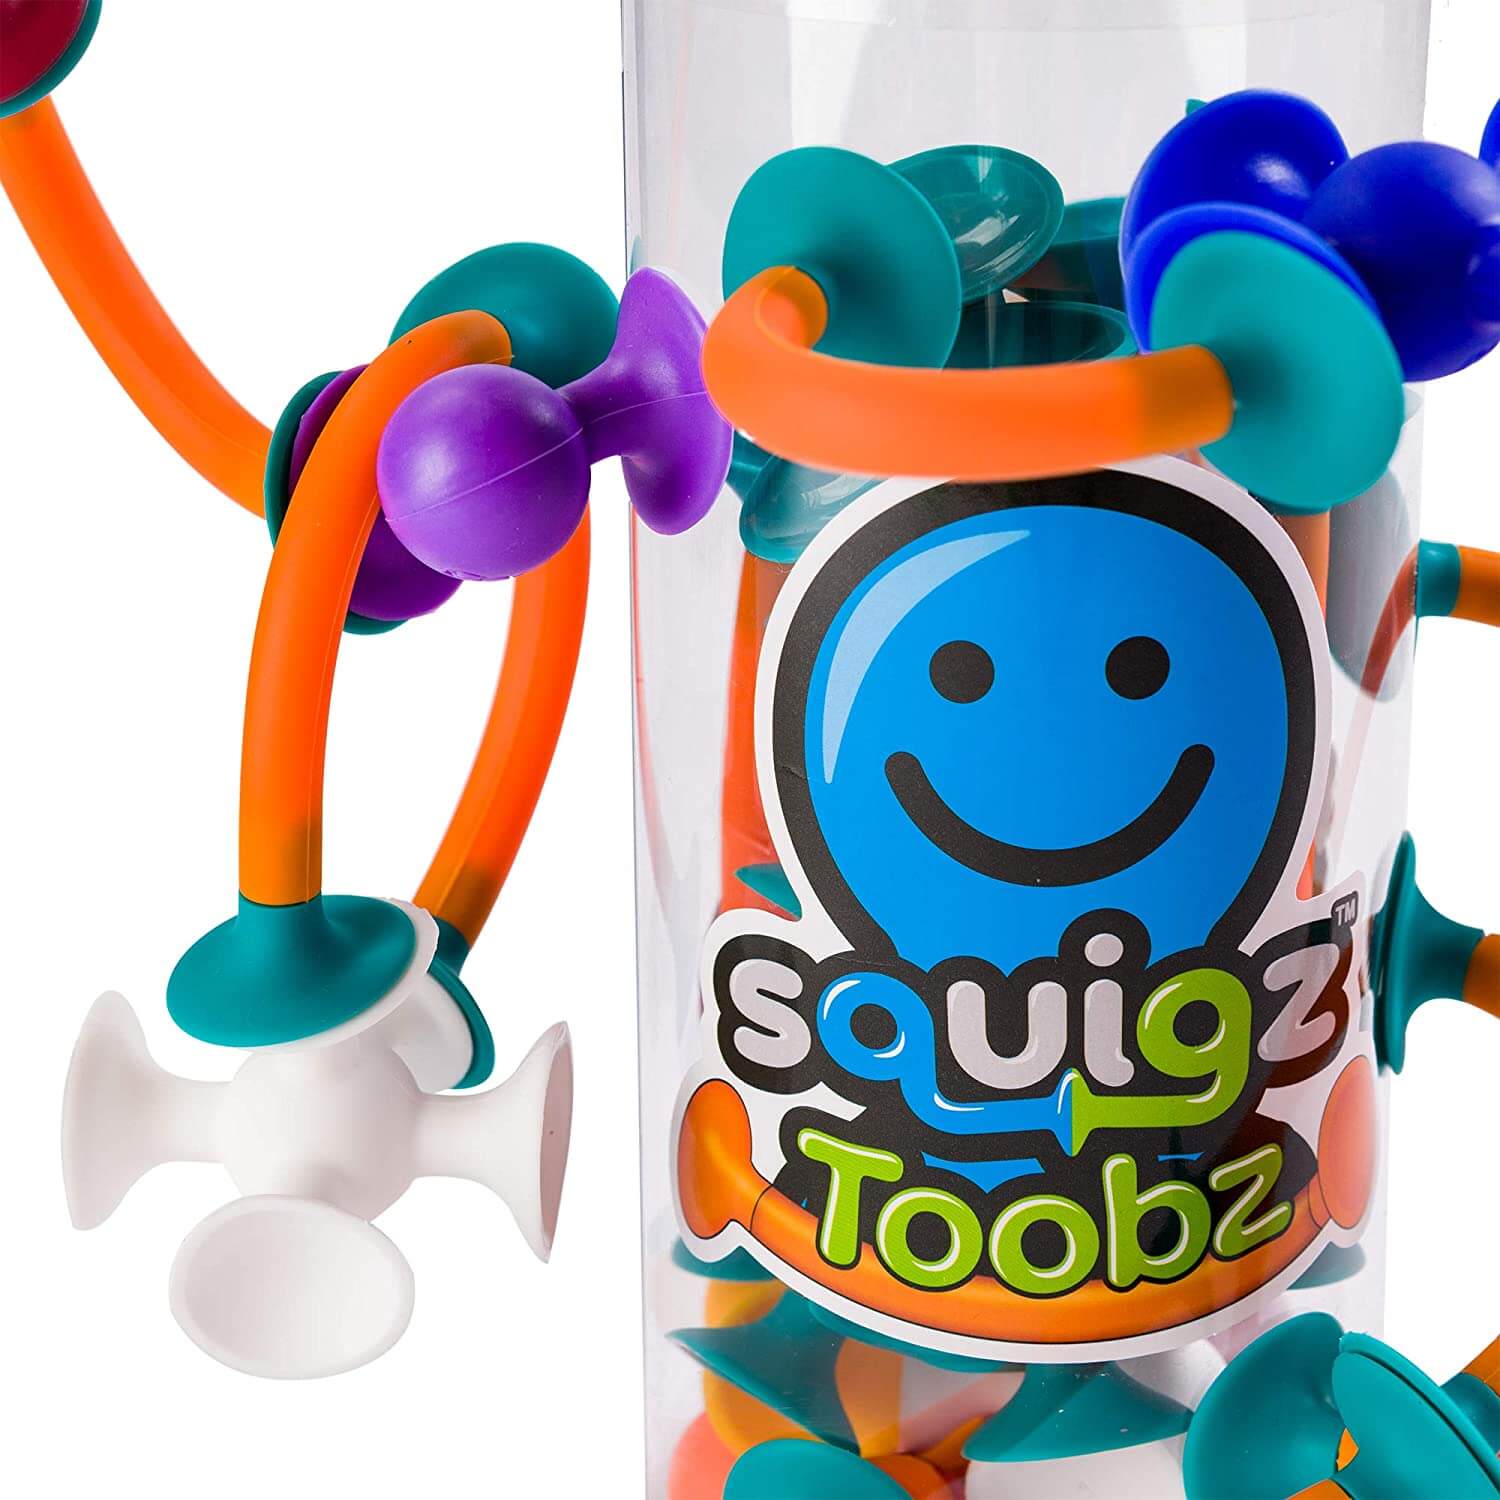 Front view of the Fat Brain Toys Squigz Toobz toy.